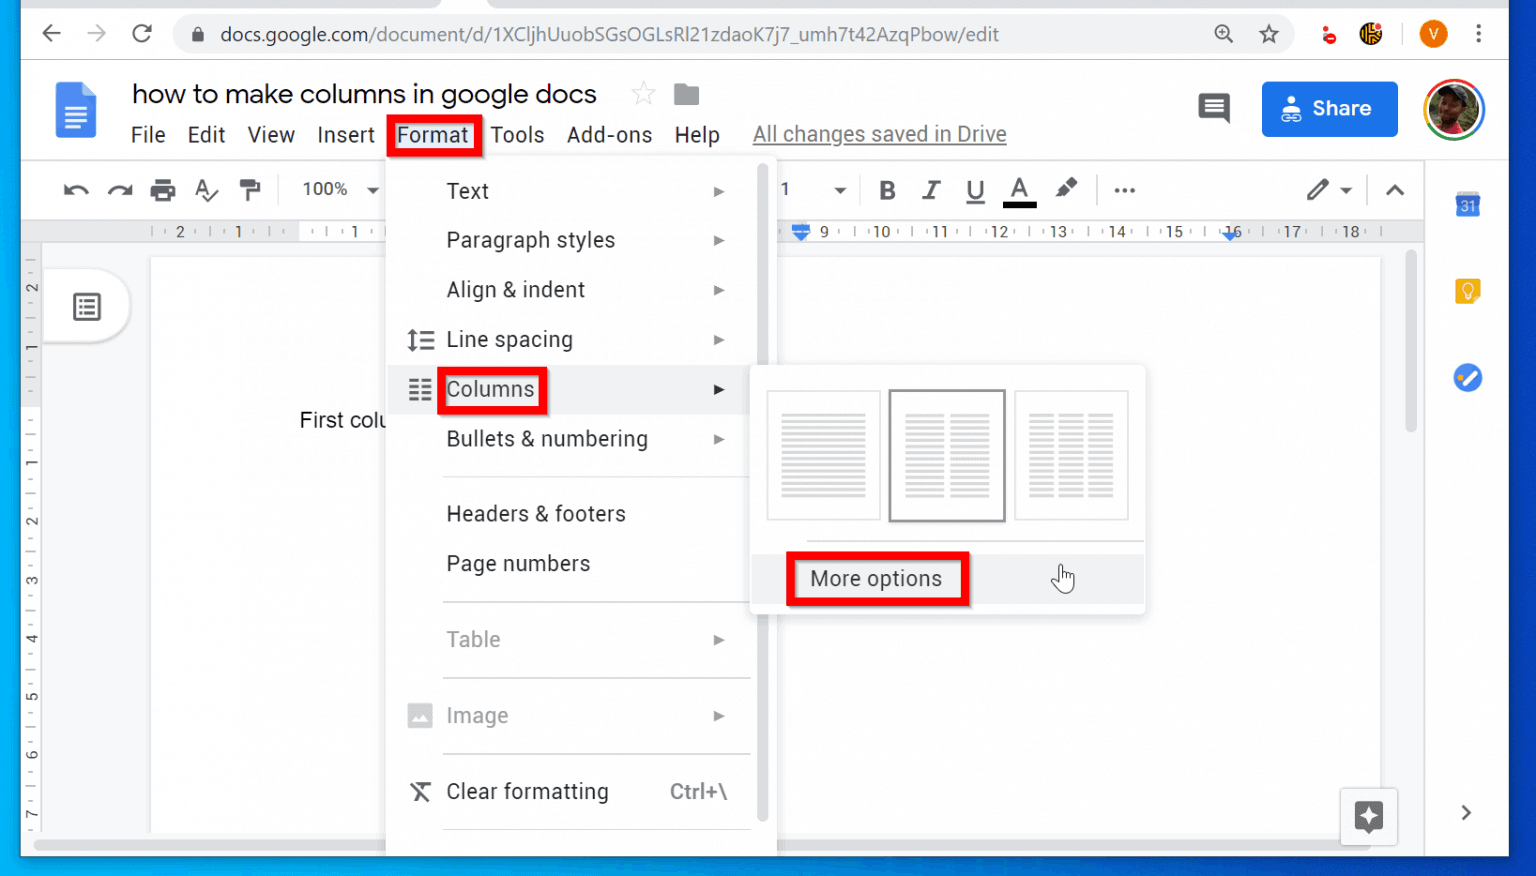 How to Make Columns in Google Docs from a PC